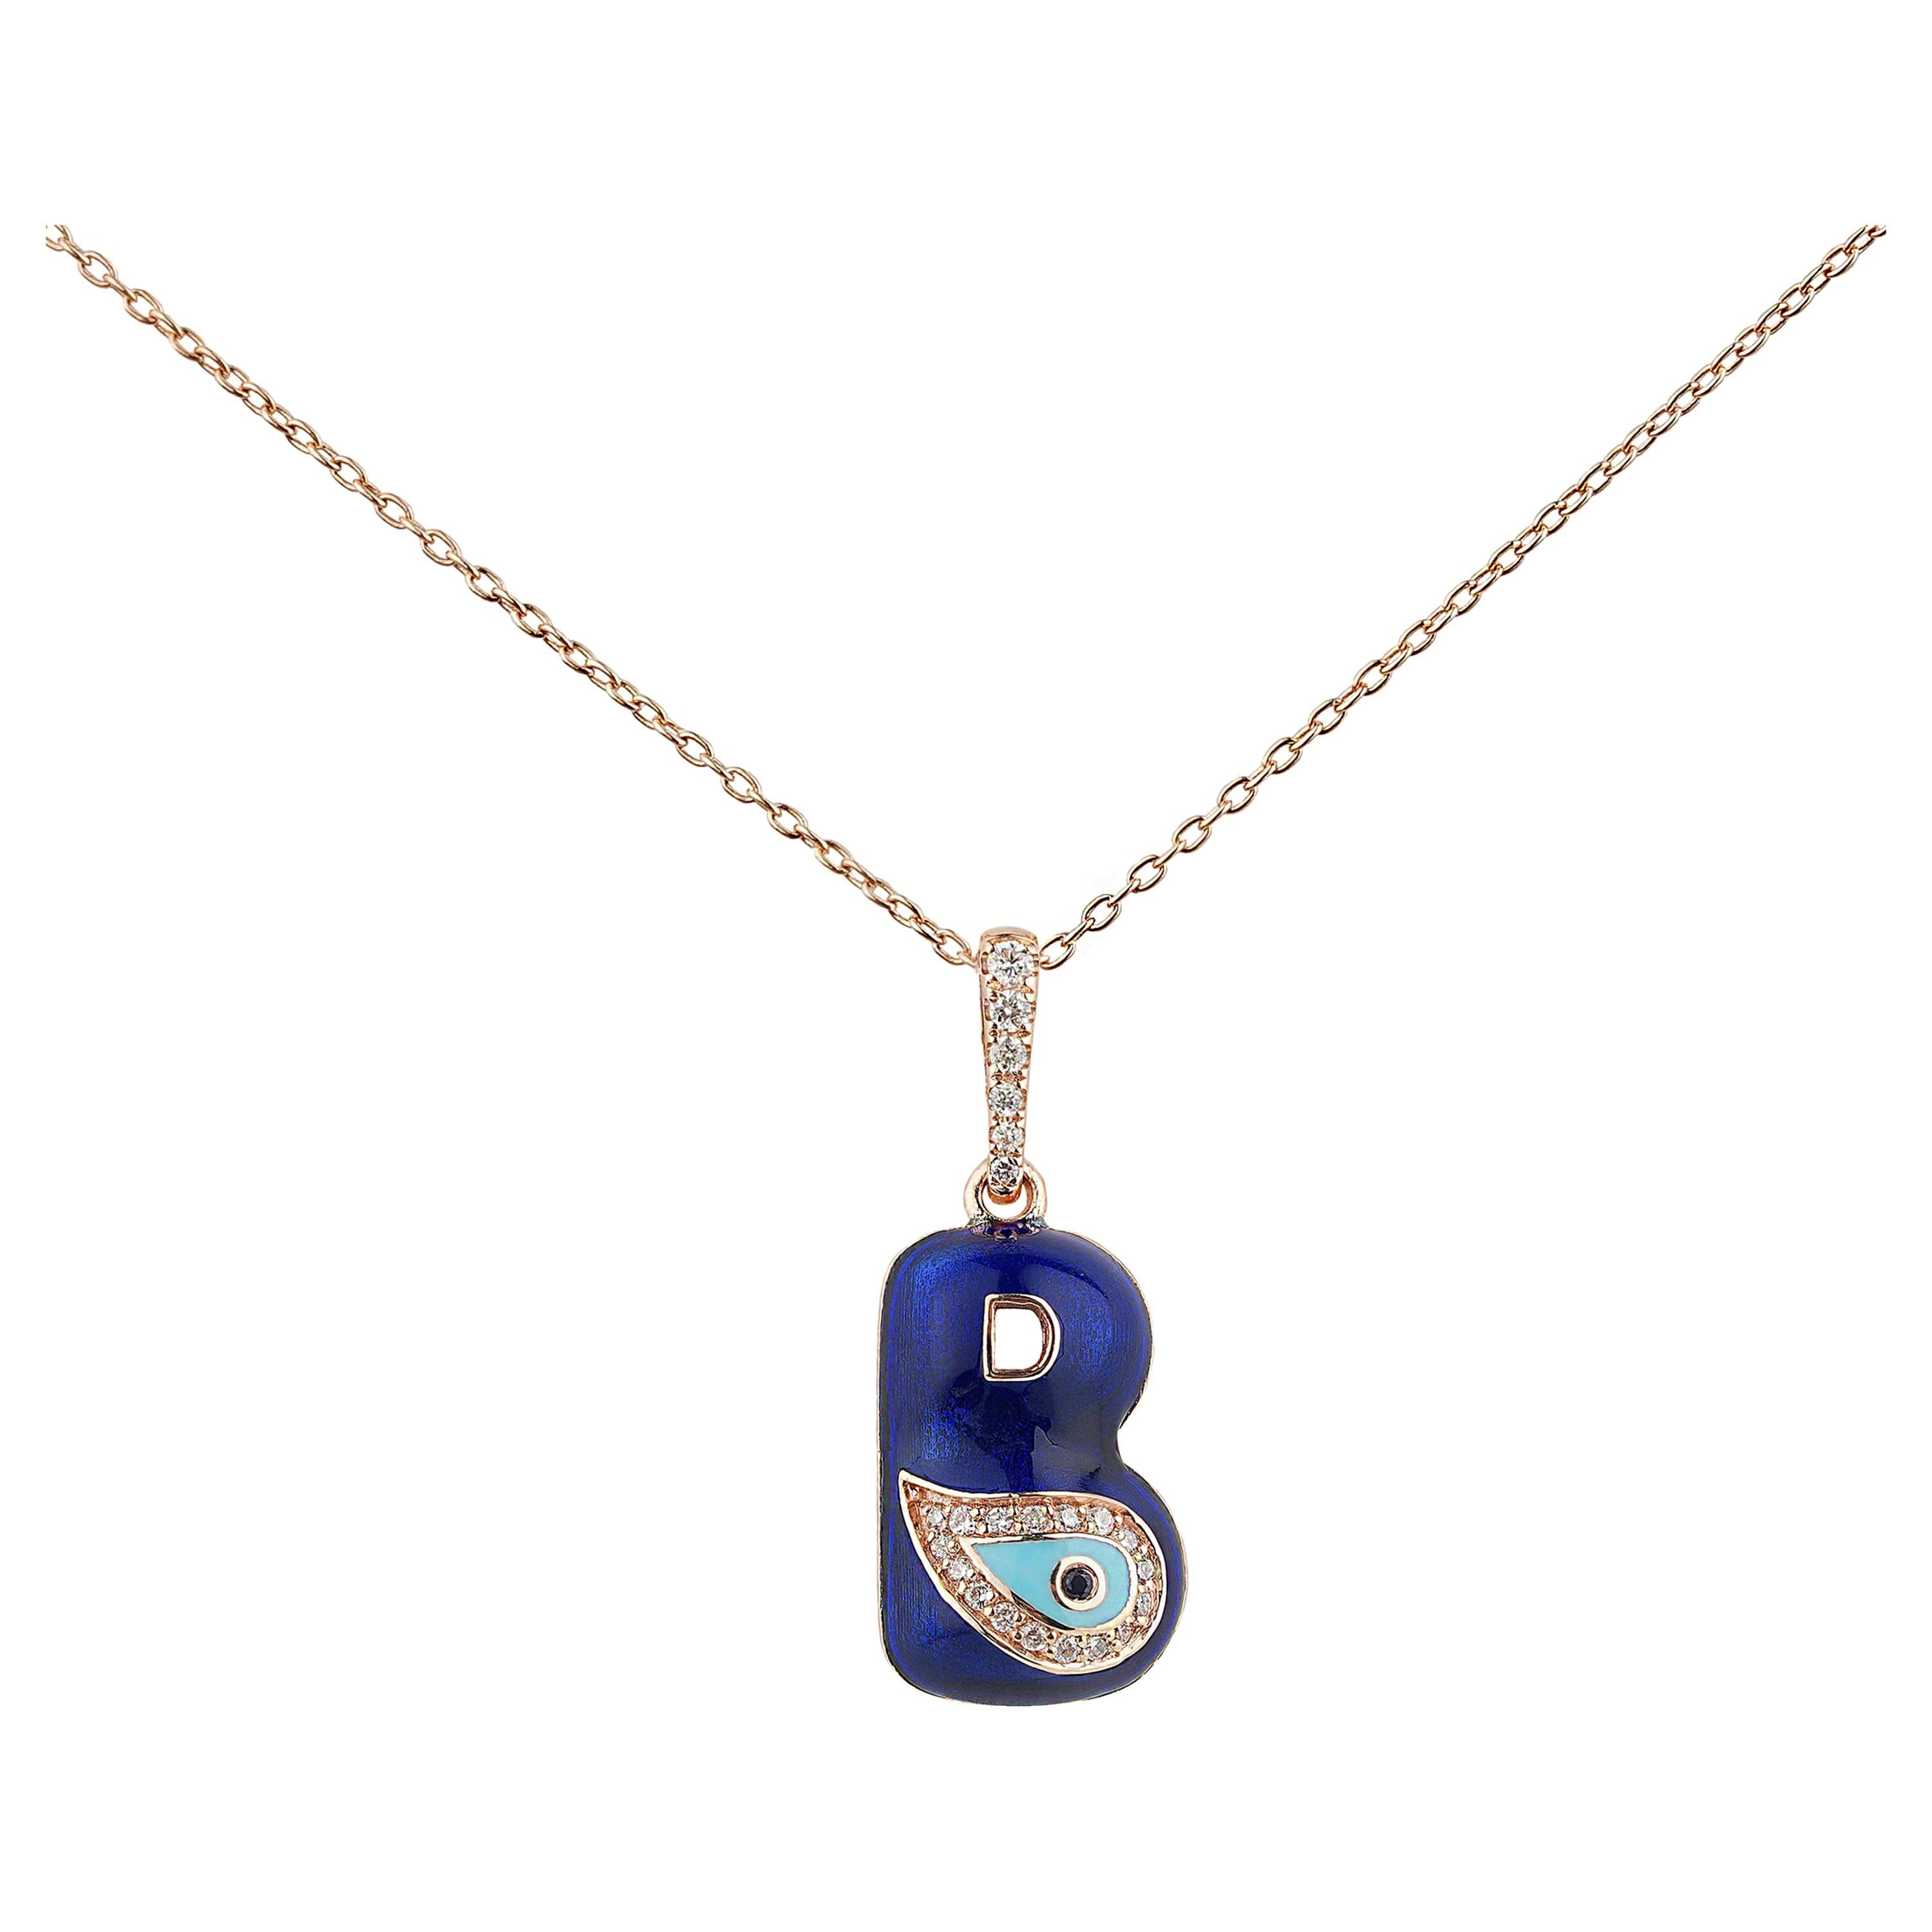 Personalize in White, Yellow, or Rose Gold, Nazarlique Evil Eye ID Charm  Necklace With Letters is a Chic and Trendsetting Way to Personalize Your Initials.
Our Handcrafting Diamond and Blue Sapphire 14 Karat Yellow Gold Enamel Alphabet Charms Come